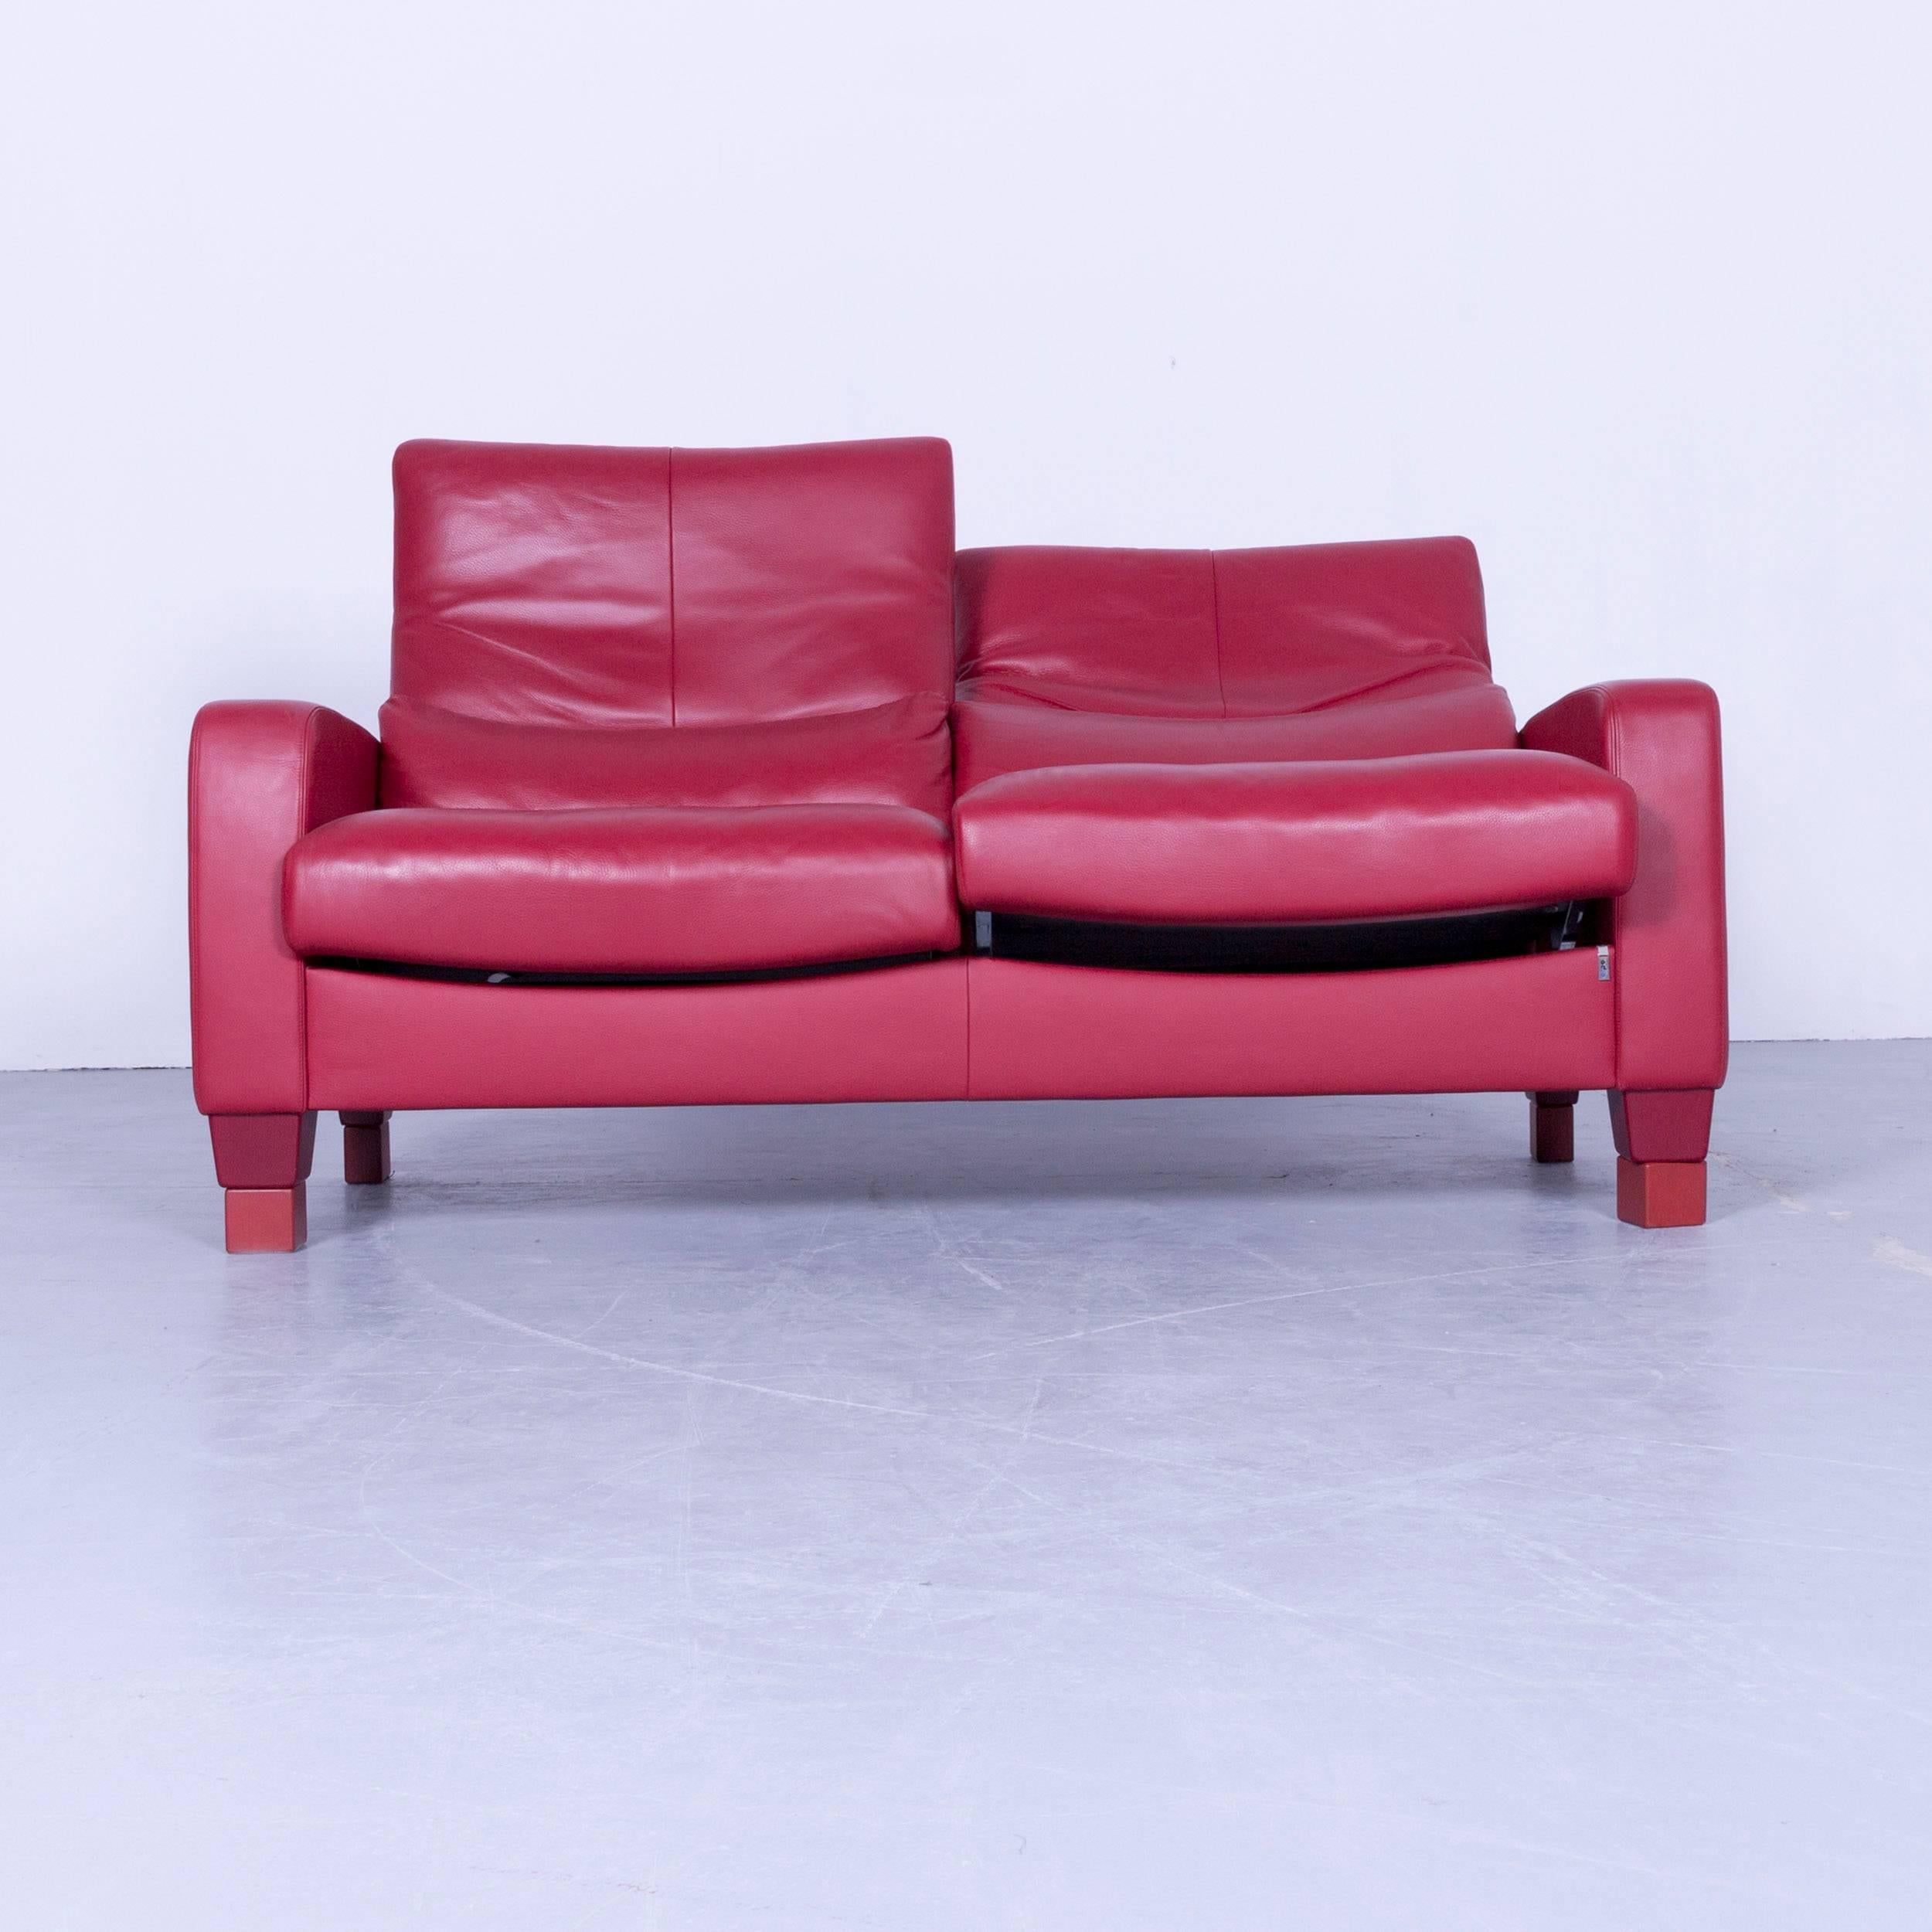 Erpo designer sofa set leather red two-seat and armchair, in a minimalistic and modern design, with convenient functions, made for pure comfort.